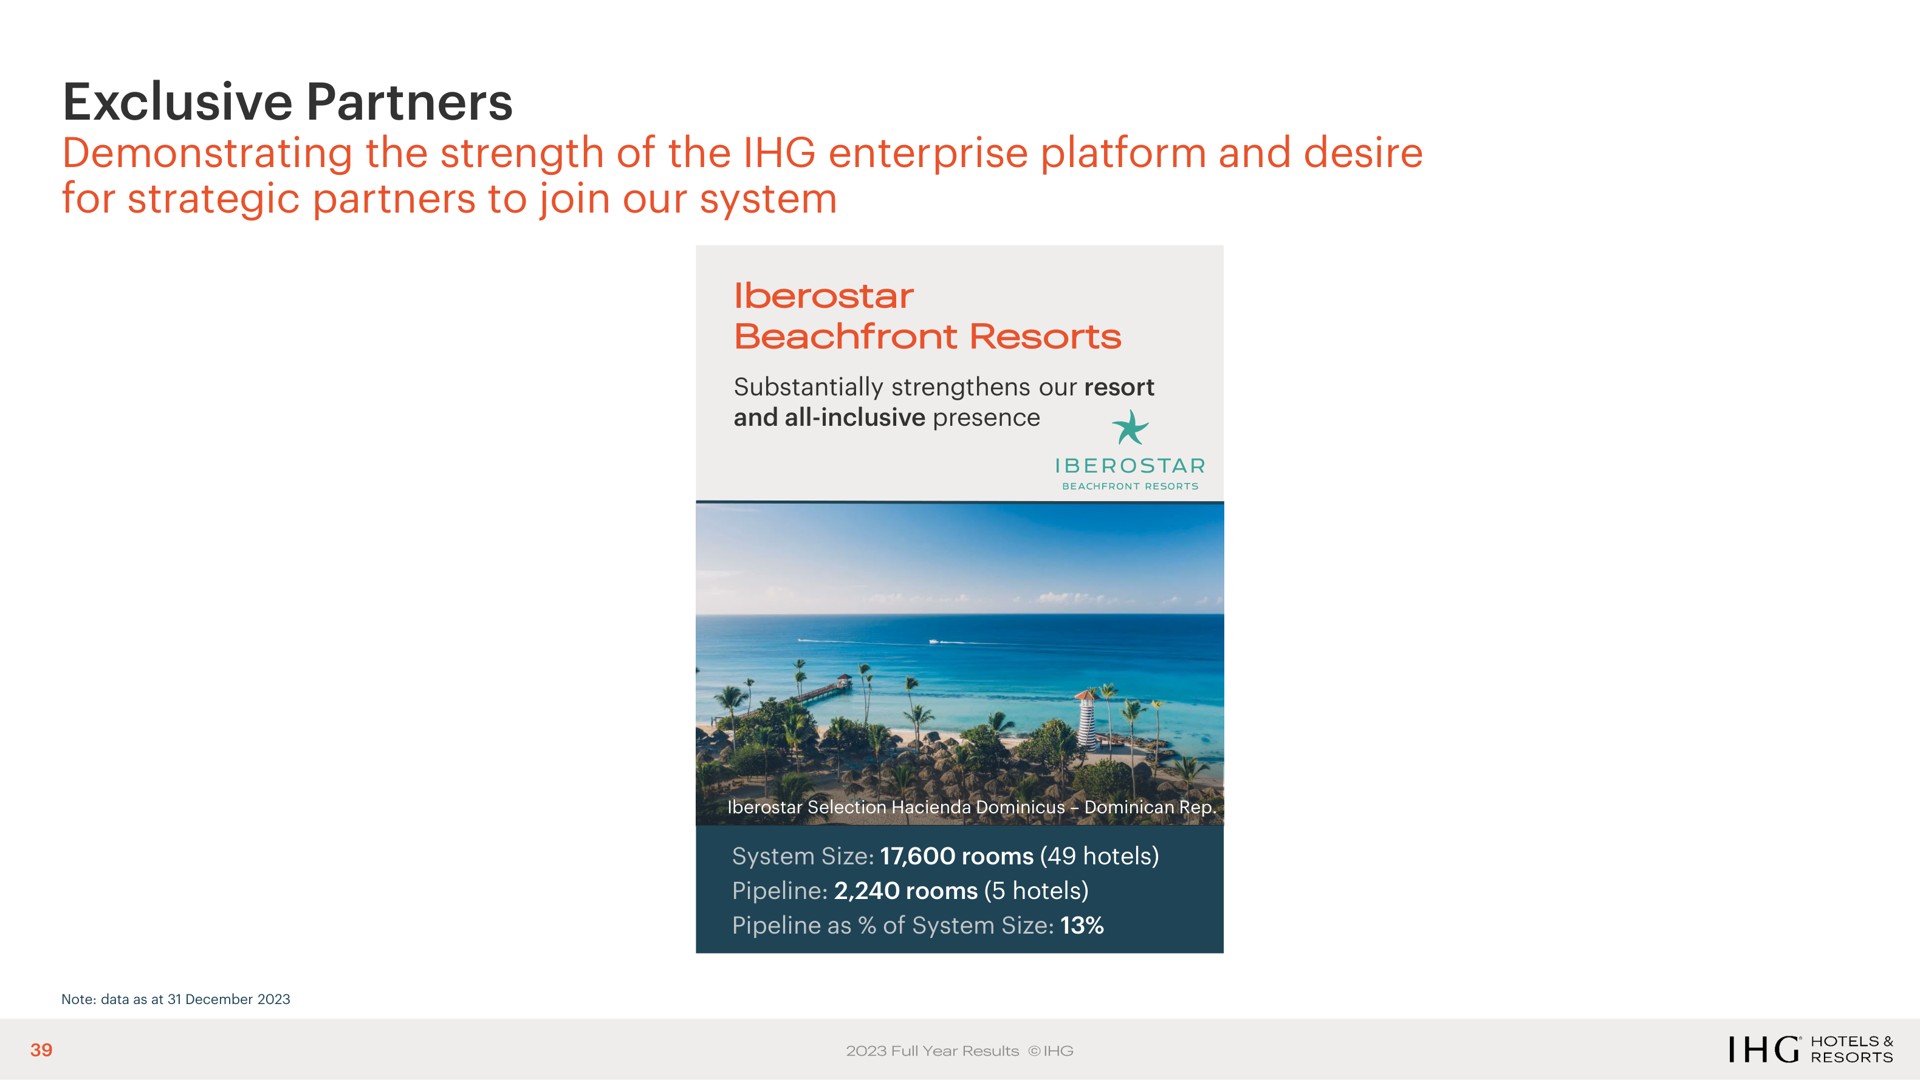 exclusive partners demonstrating the strength of the enterprise platform and desire | IHG Hotels